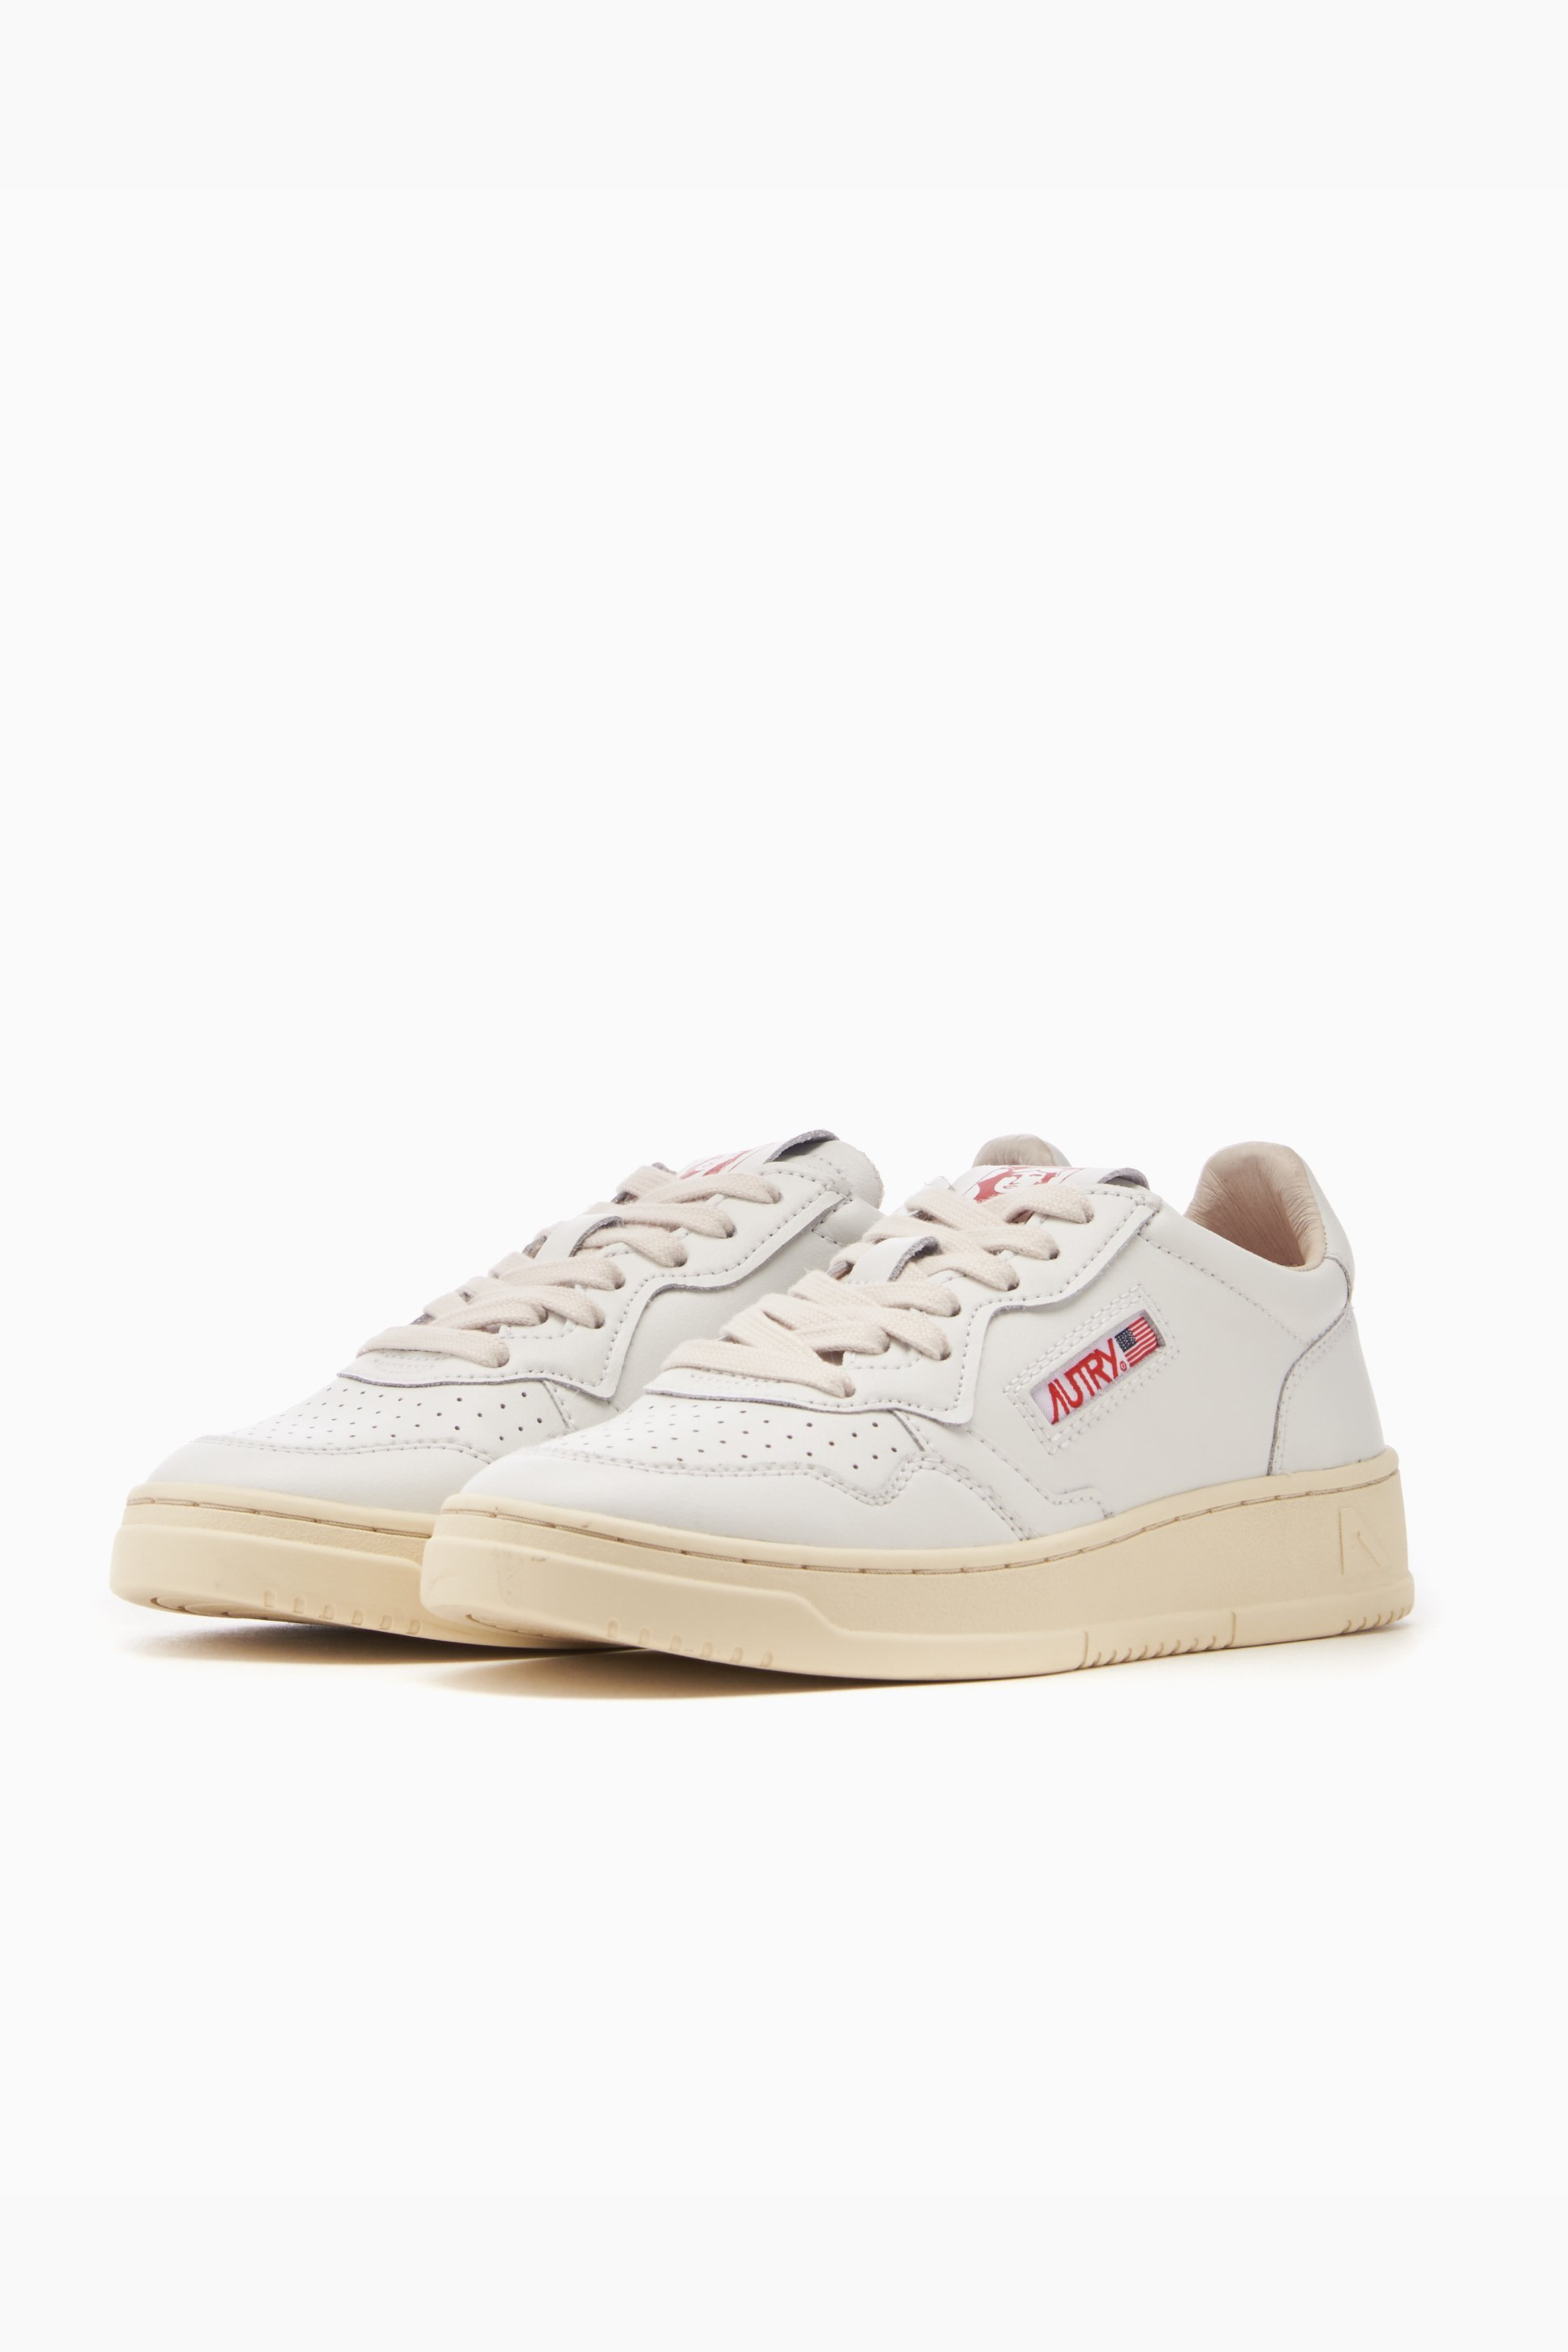 AULW-LI02 - MEDALIST LOW SNEAKERS IN LEATHER WHITE/RED